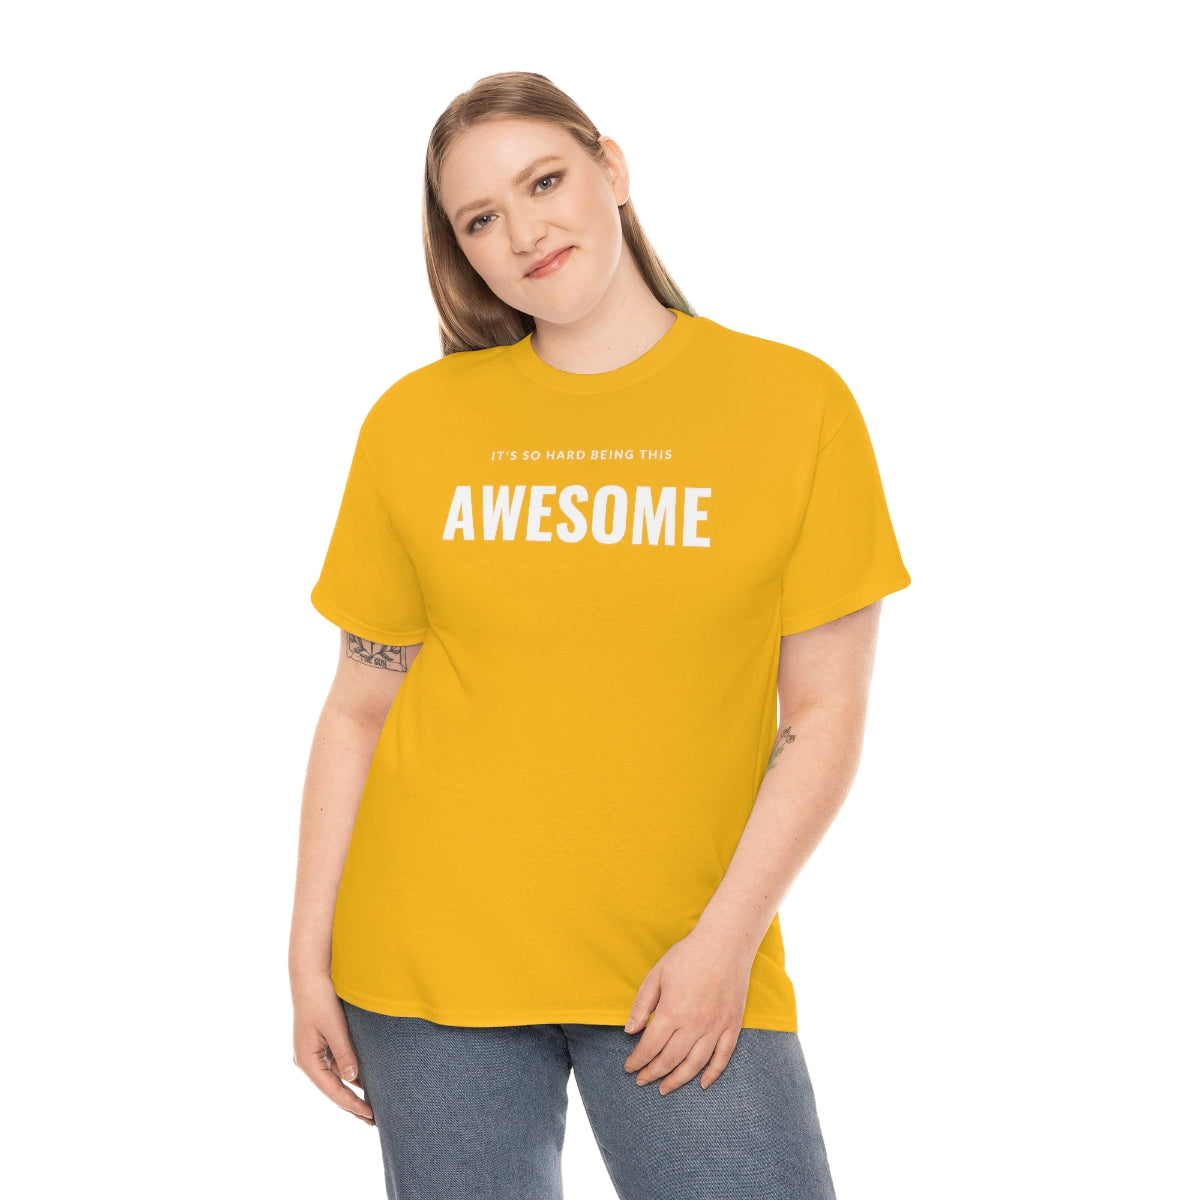 It's hard being this AWESOME Tee